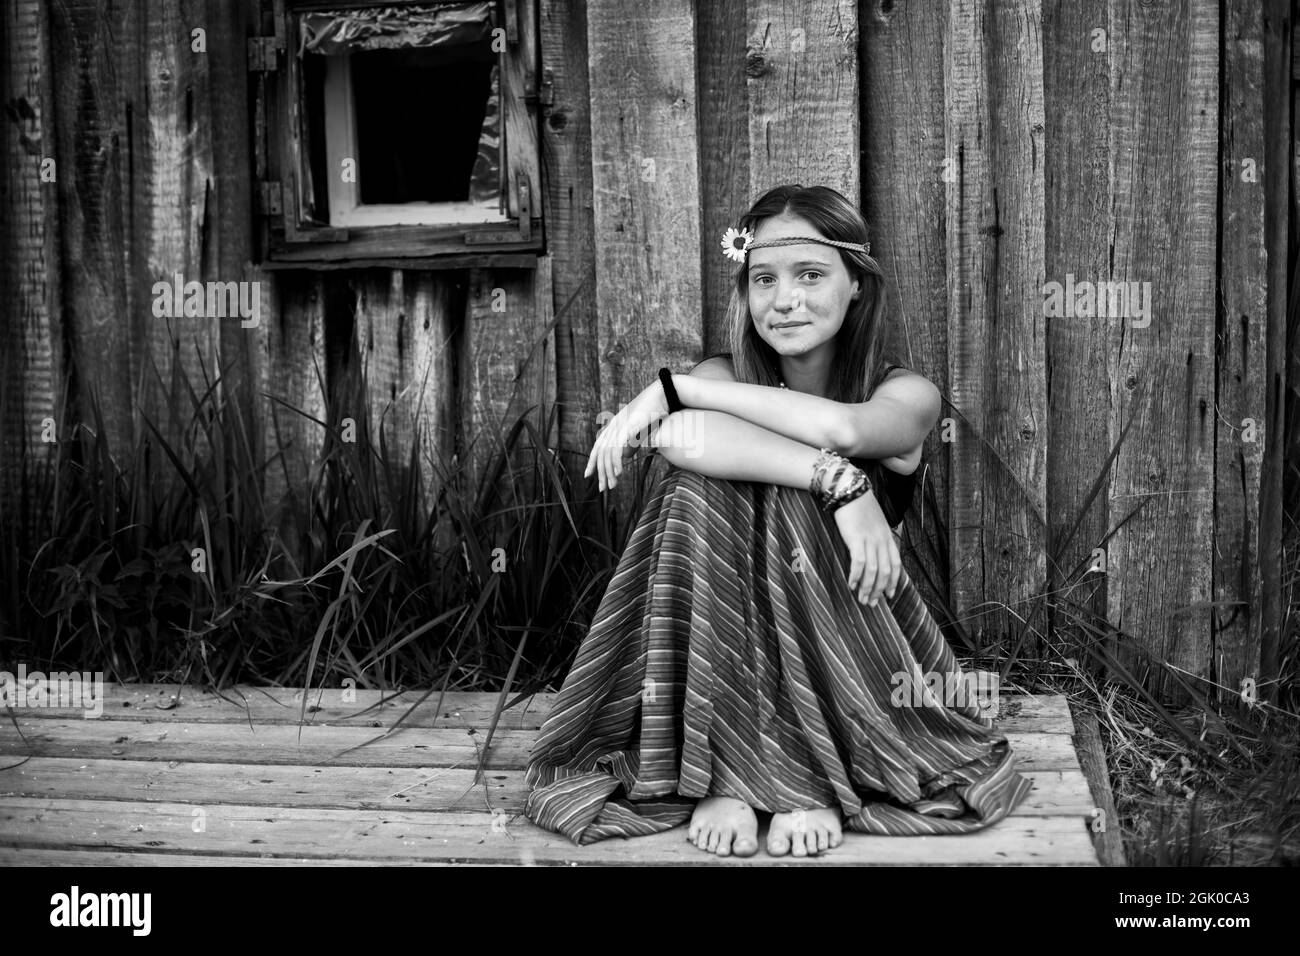 A girl with hippie jewelry outdoors in rural surroundings. Black and white photo. Stock Photo